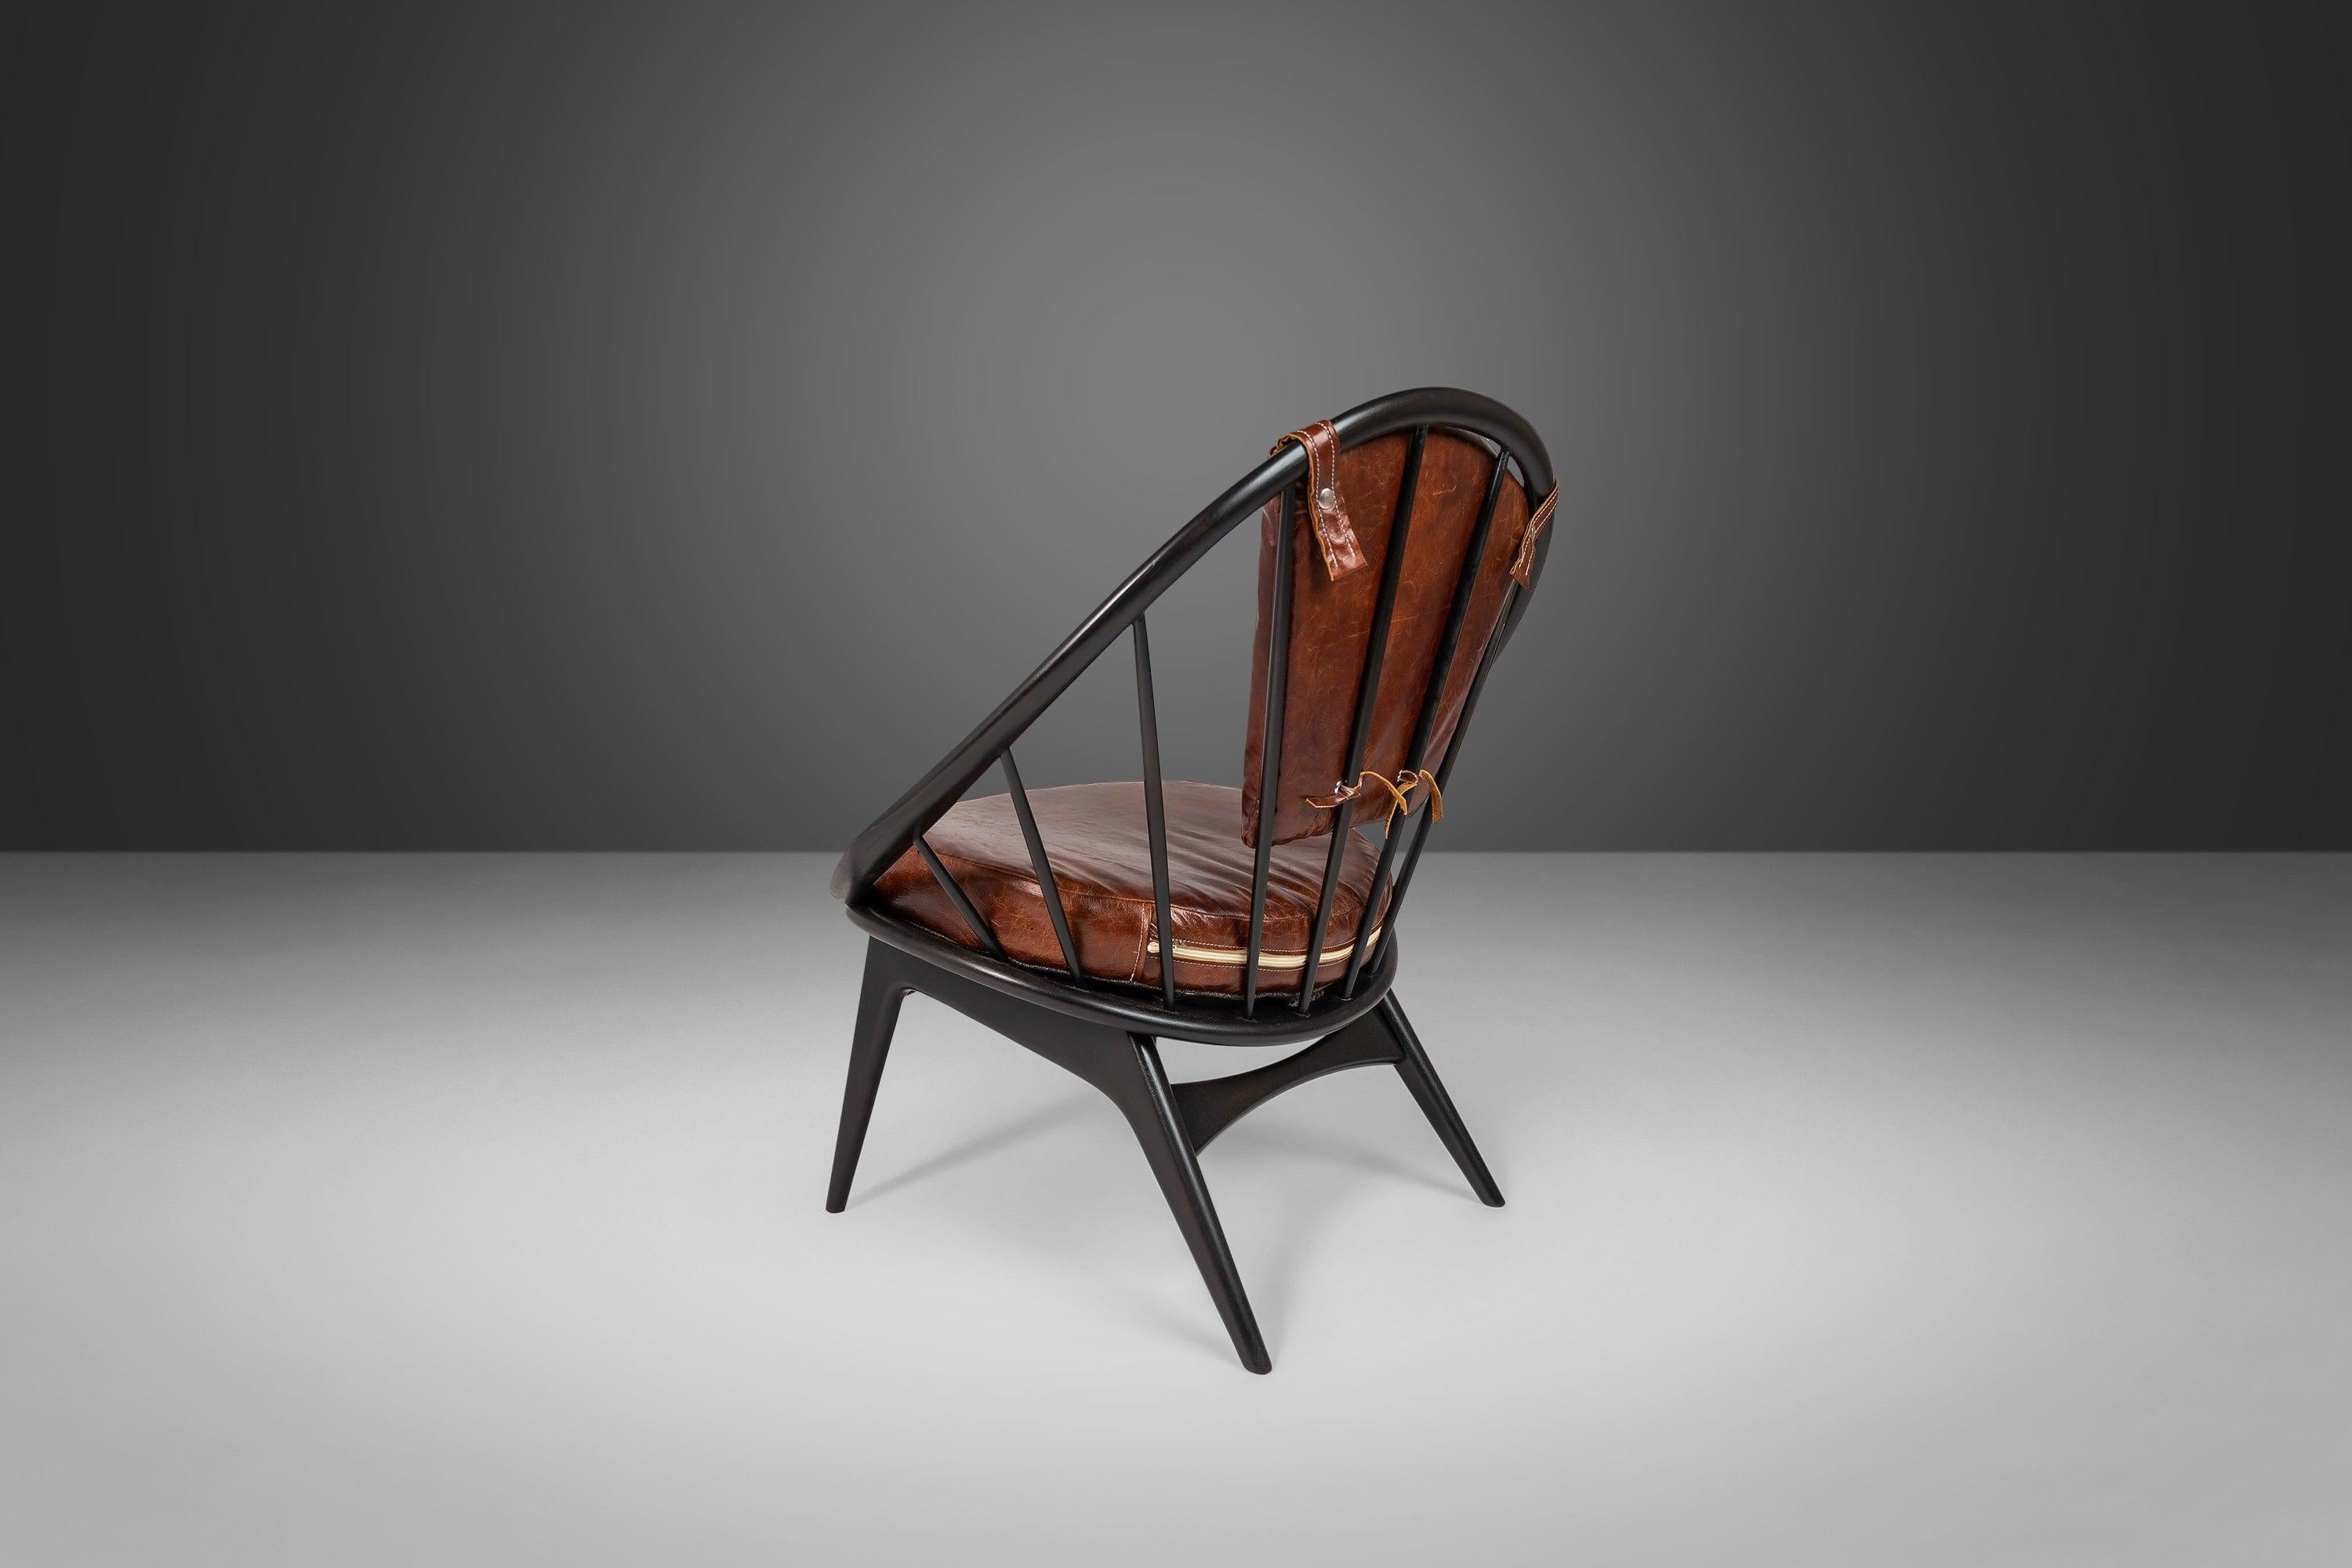 Ib Kofod-Larsen for Selig Ebonized Hoop Chair, Peacock Chair w/ Patinaed Leather In Excellent Condition For Sale In Deland, FL